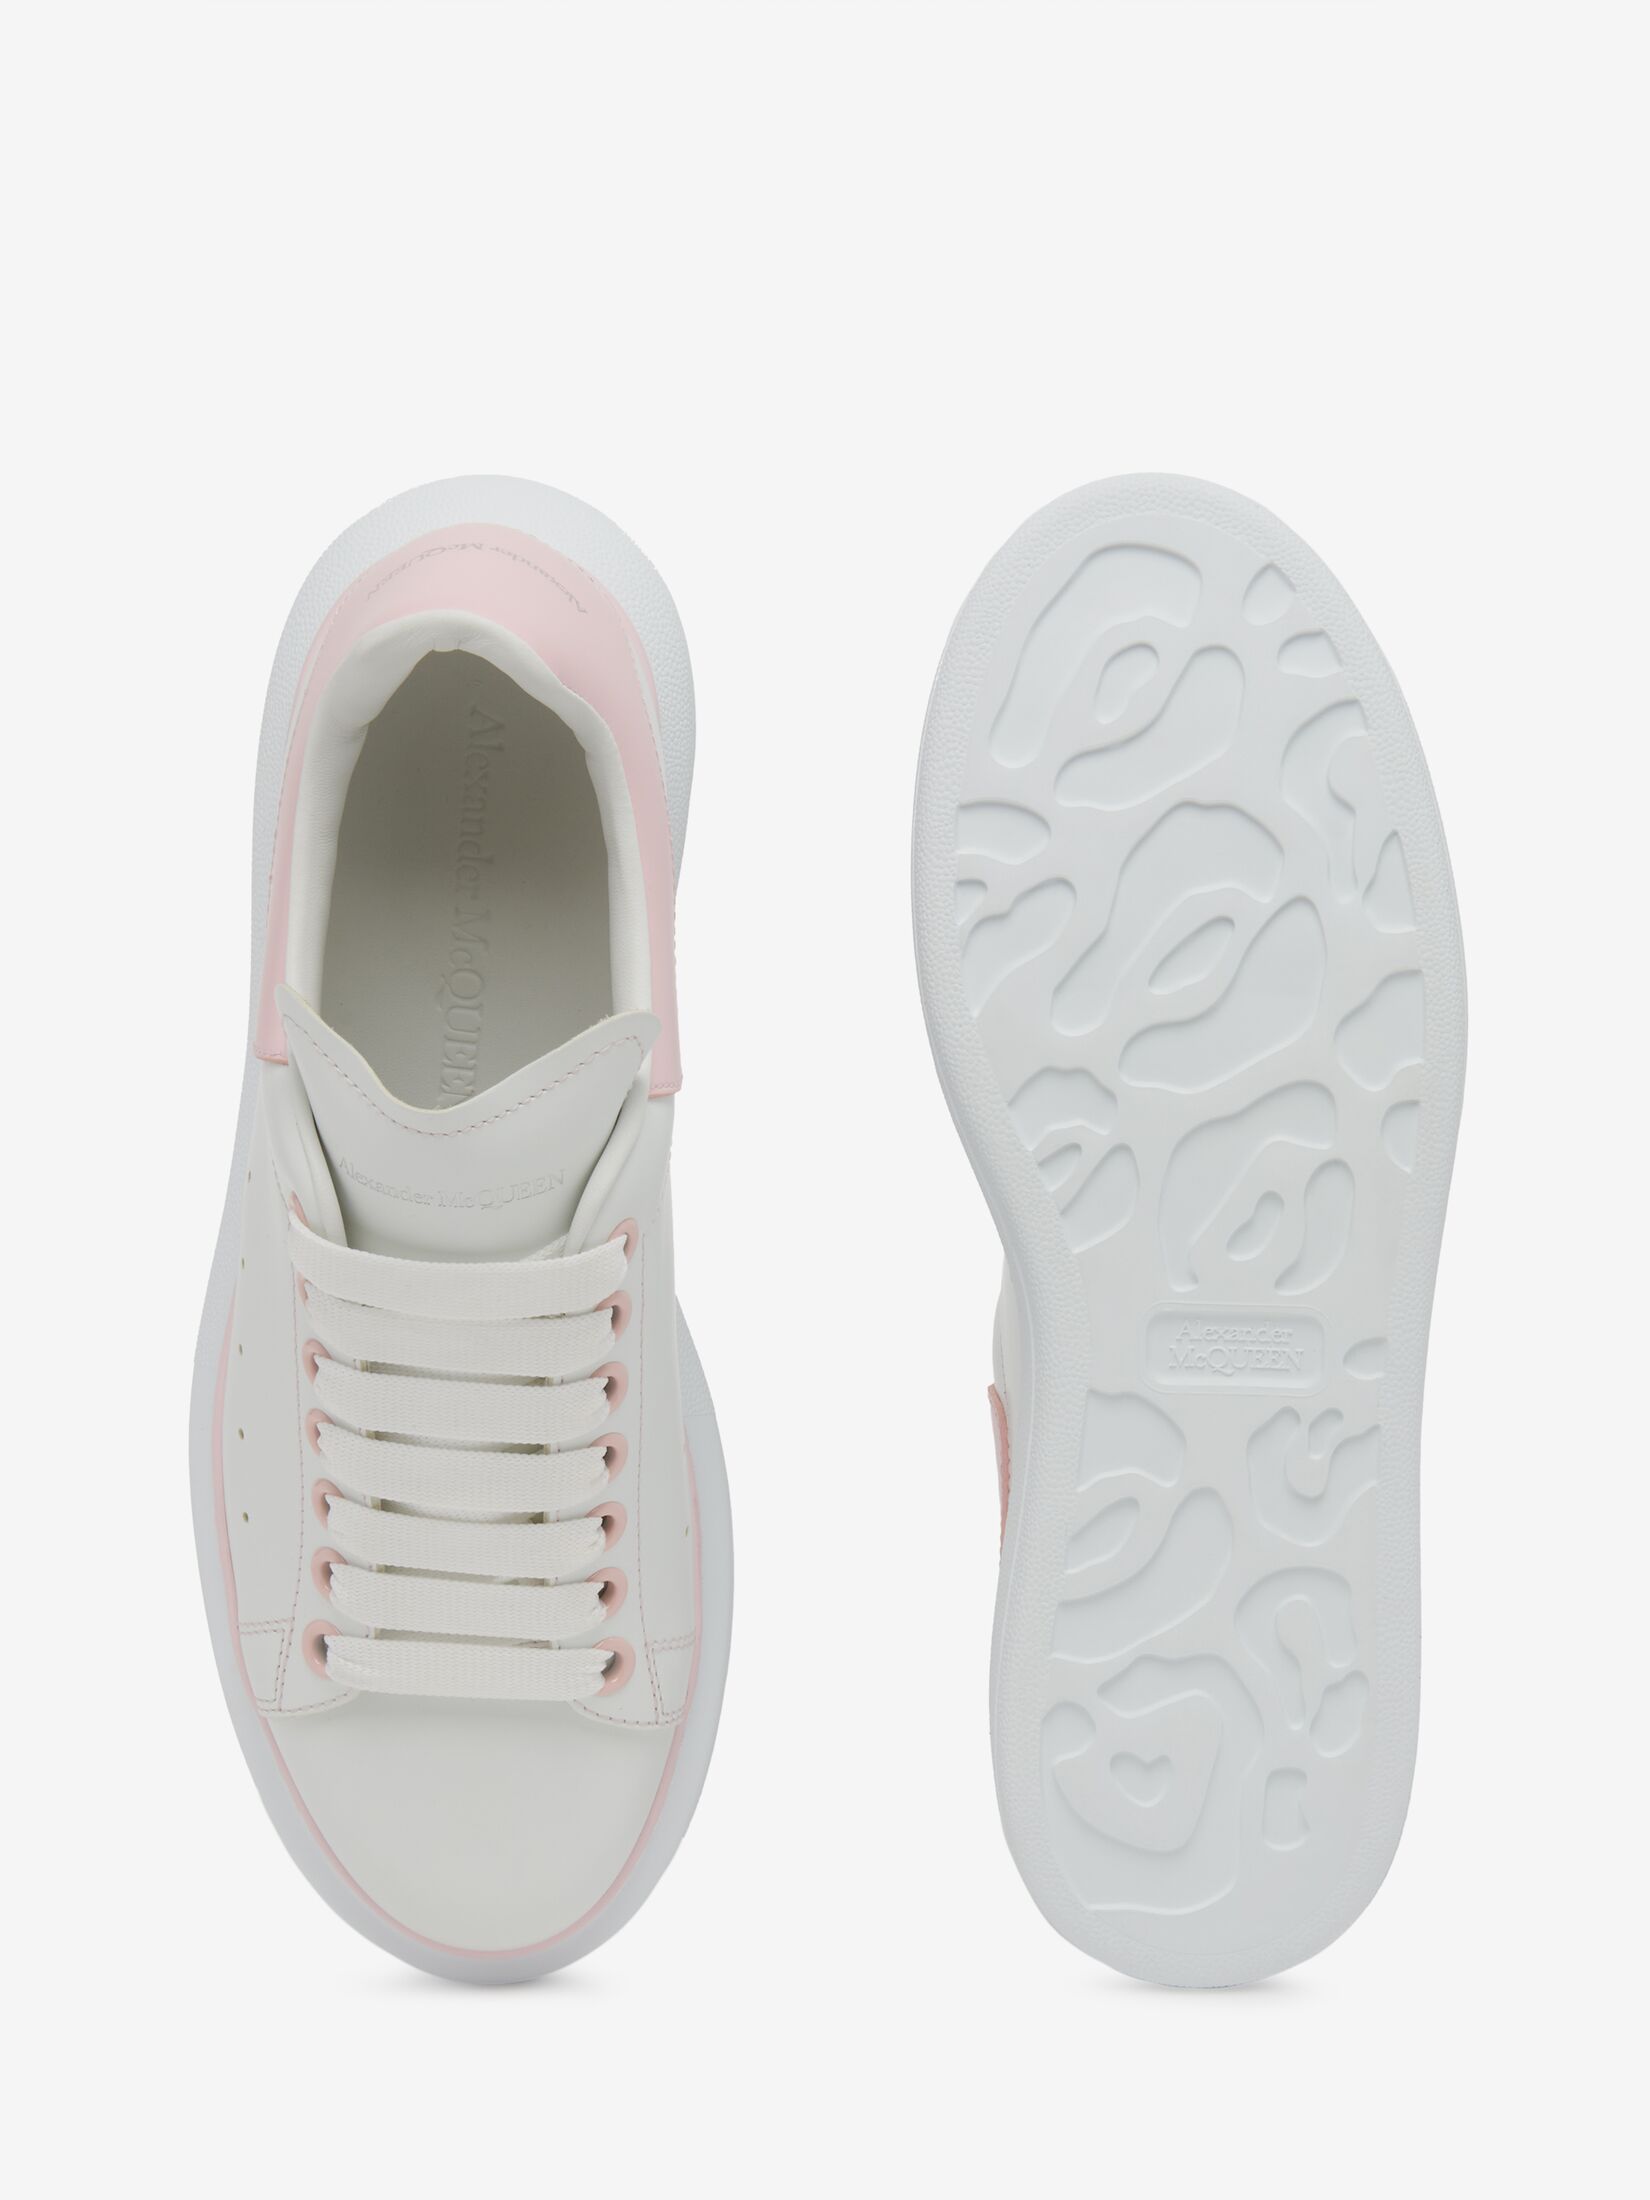 Alexander McQueen rainbow lace-up sneakers | Browns